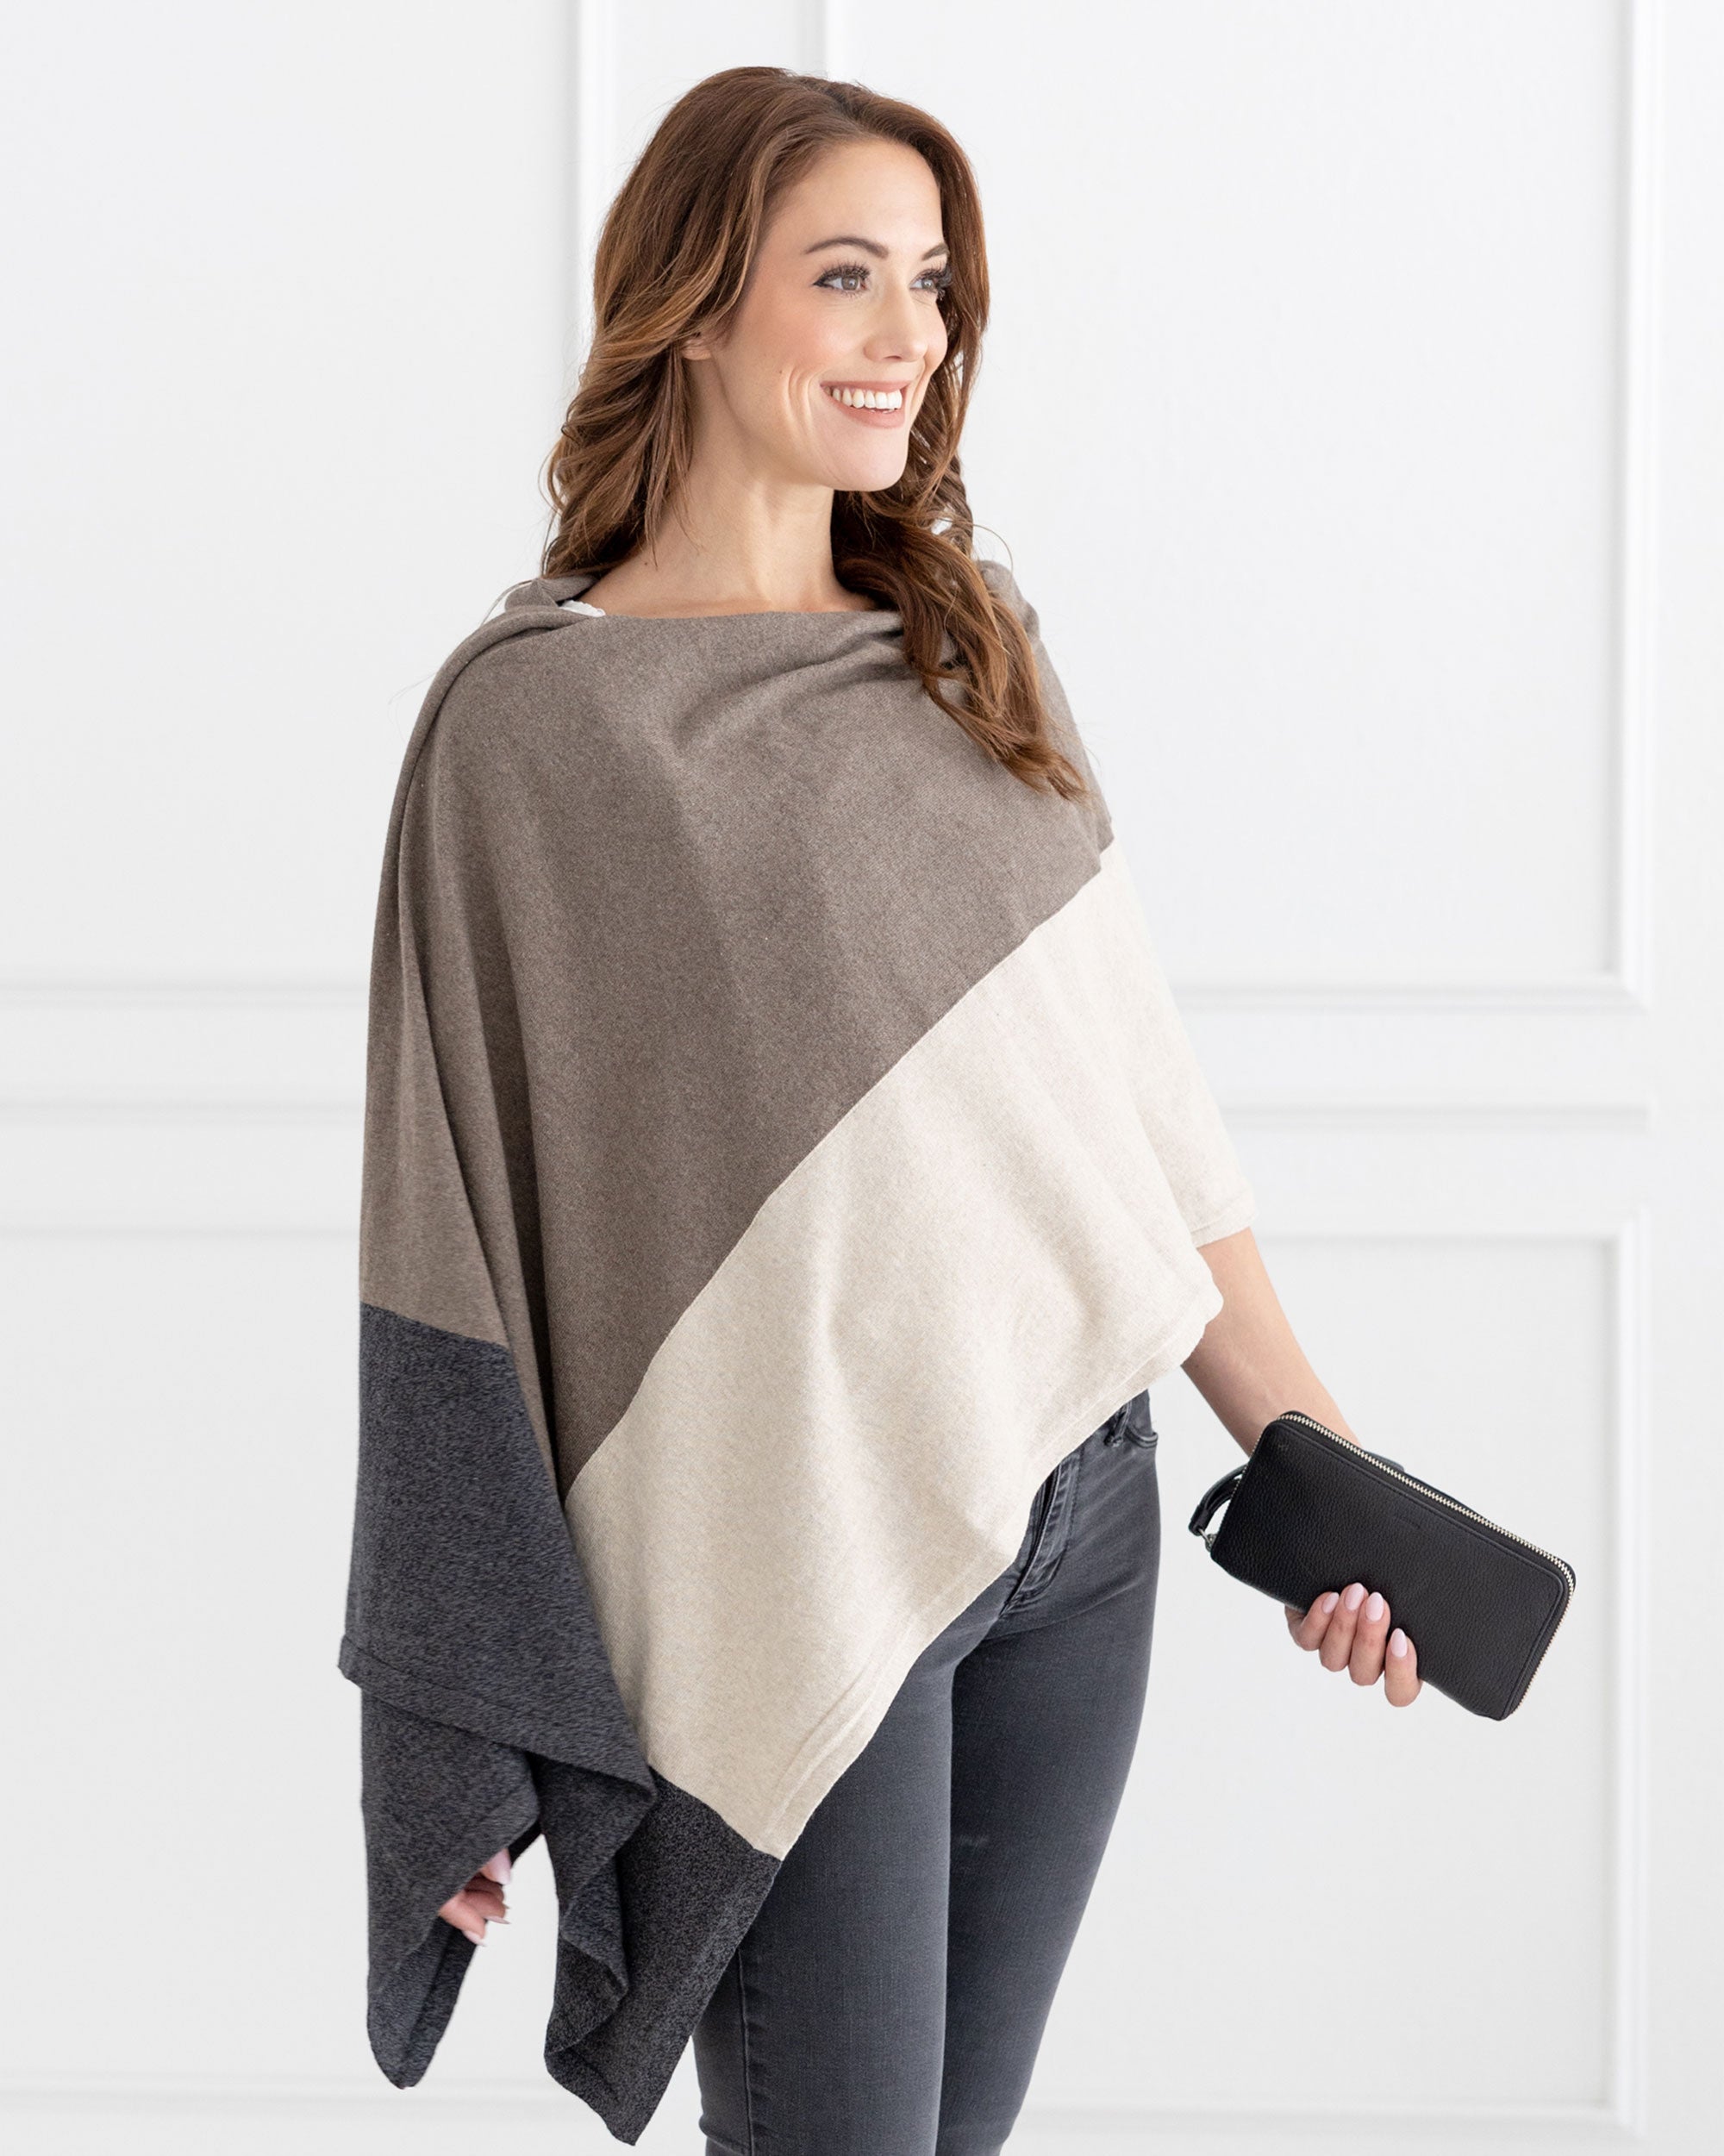 Woman wearing the Dreamsoft Travel Scarf in Brownstone Colorblock which is a brown, tan and gray scarf, worn as a wrap while holding a wallet in her hand